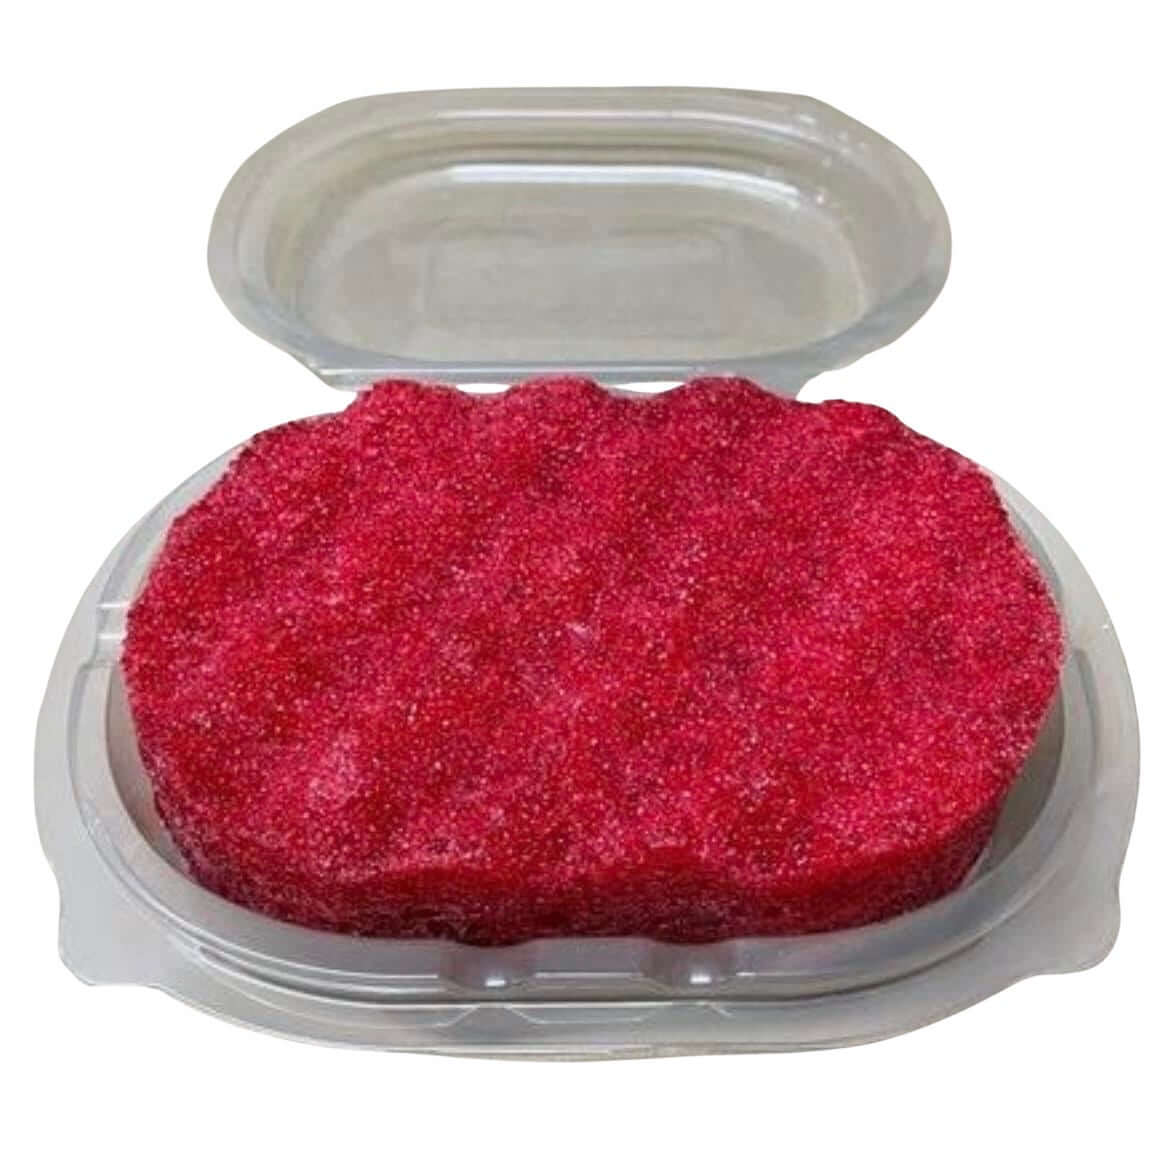 A plastic container with a red Men's Aftershave Inspired Soap Sponge by The Soap Gals in it.